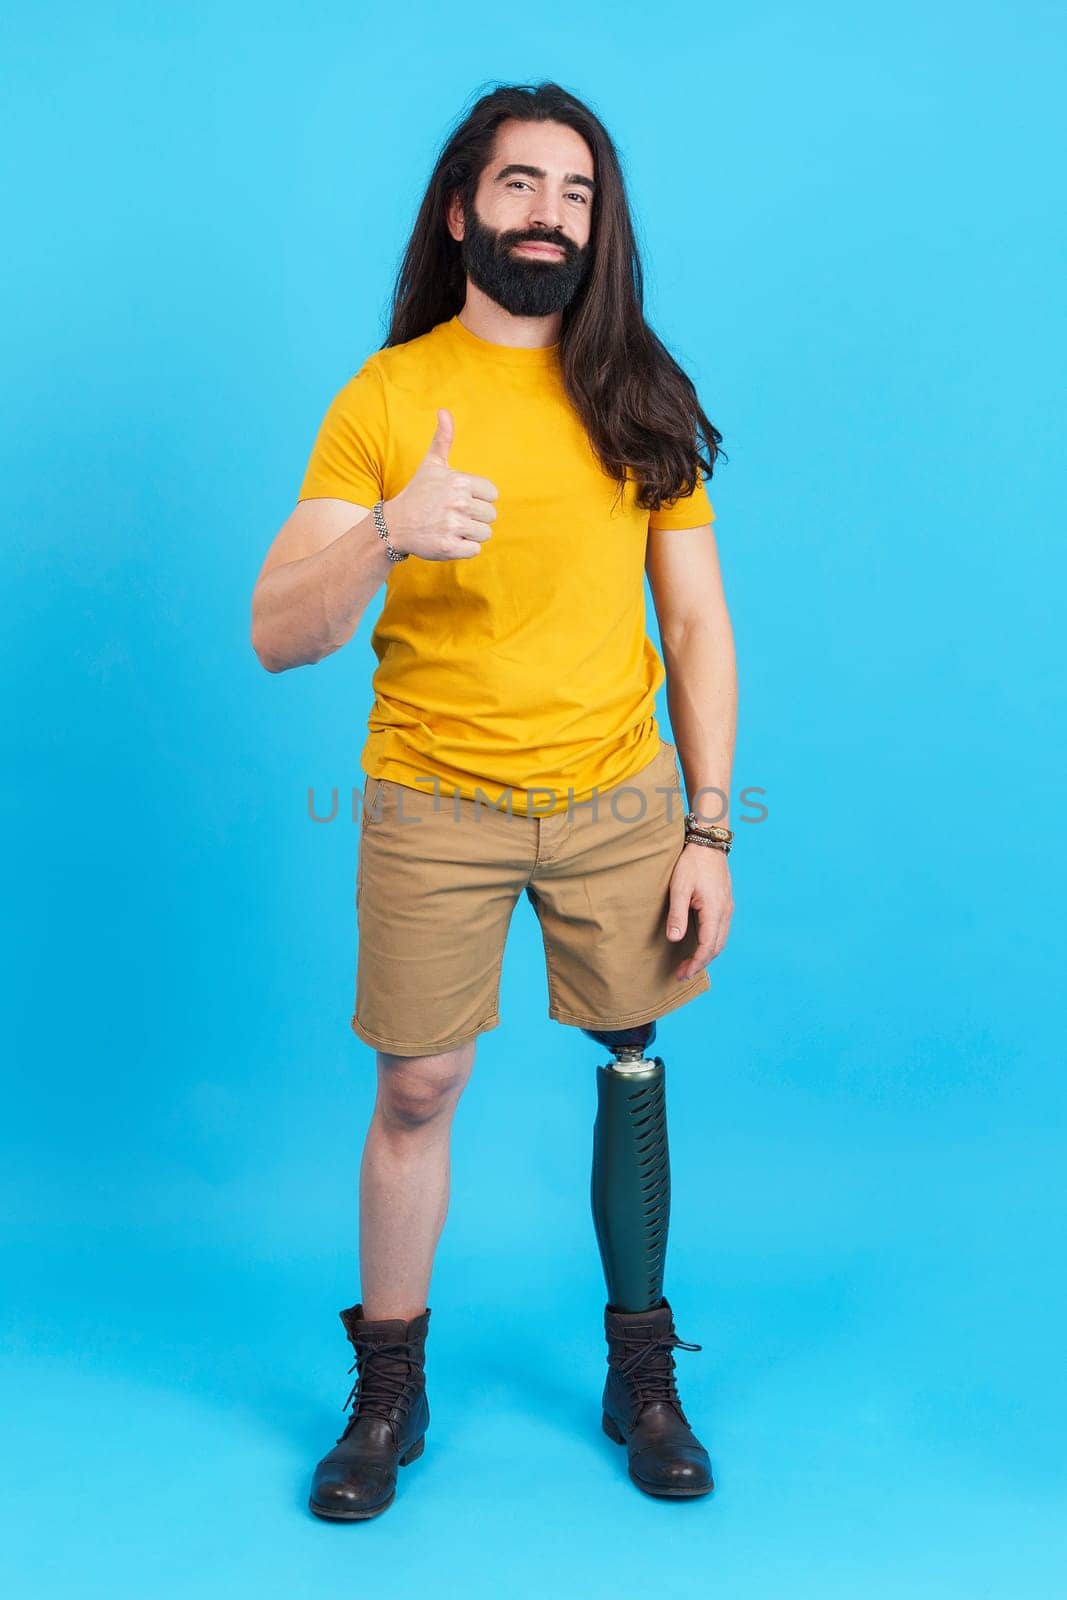 Vertical studio portrait with blue background of a man with a prosthesis leg gesturing approval with the thumb up